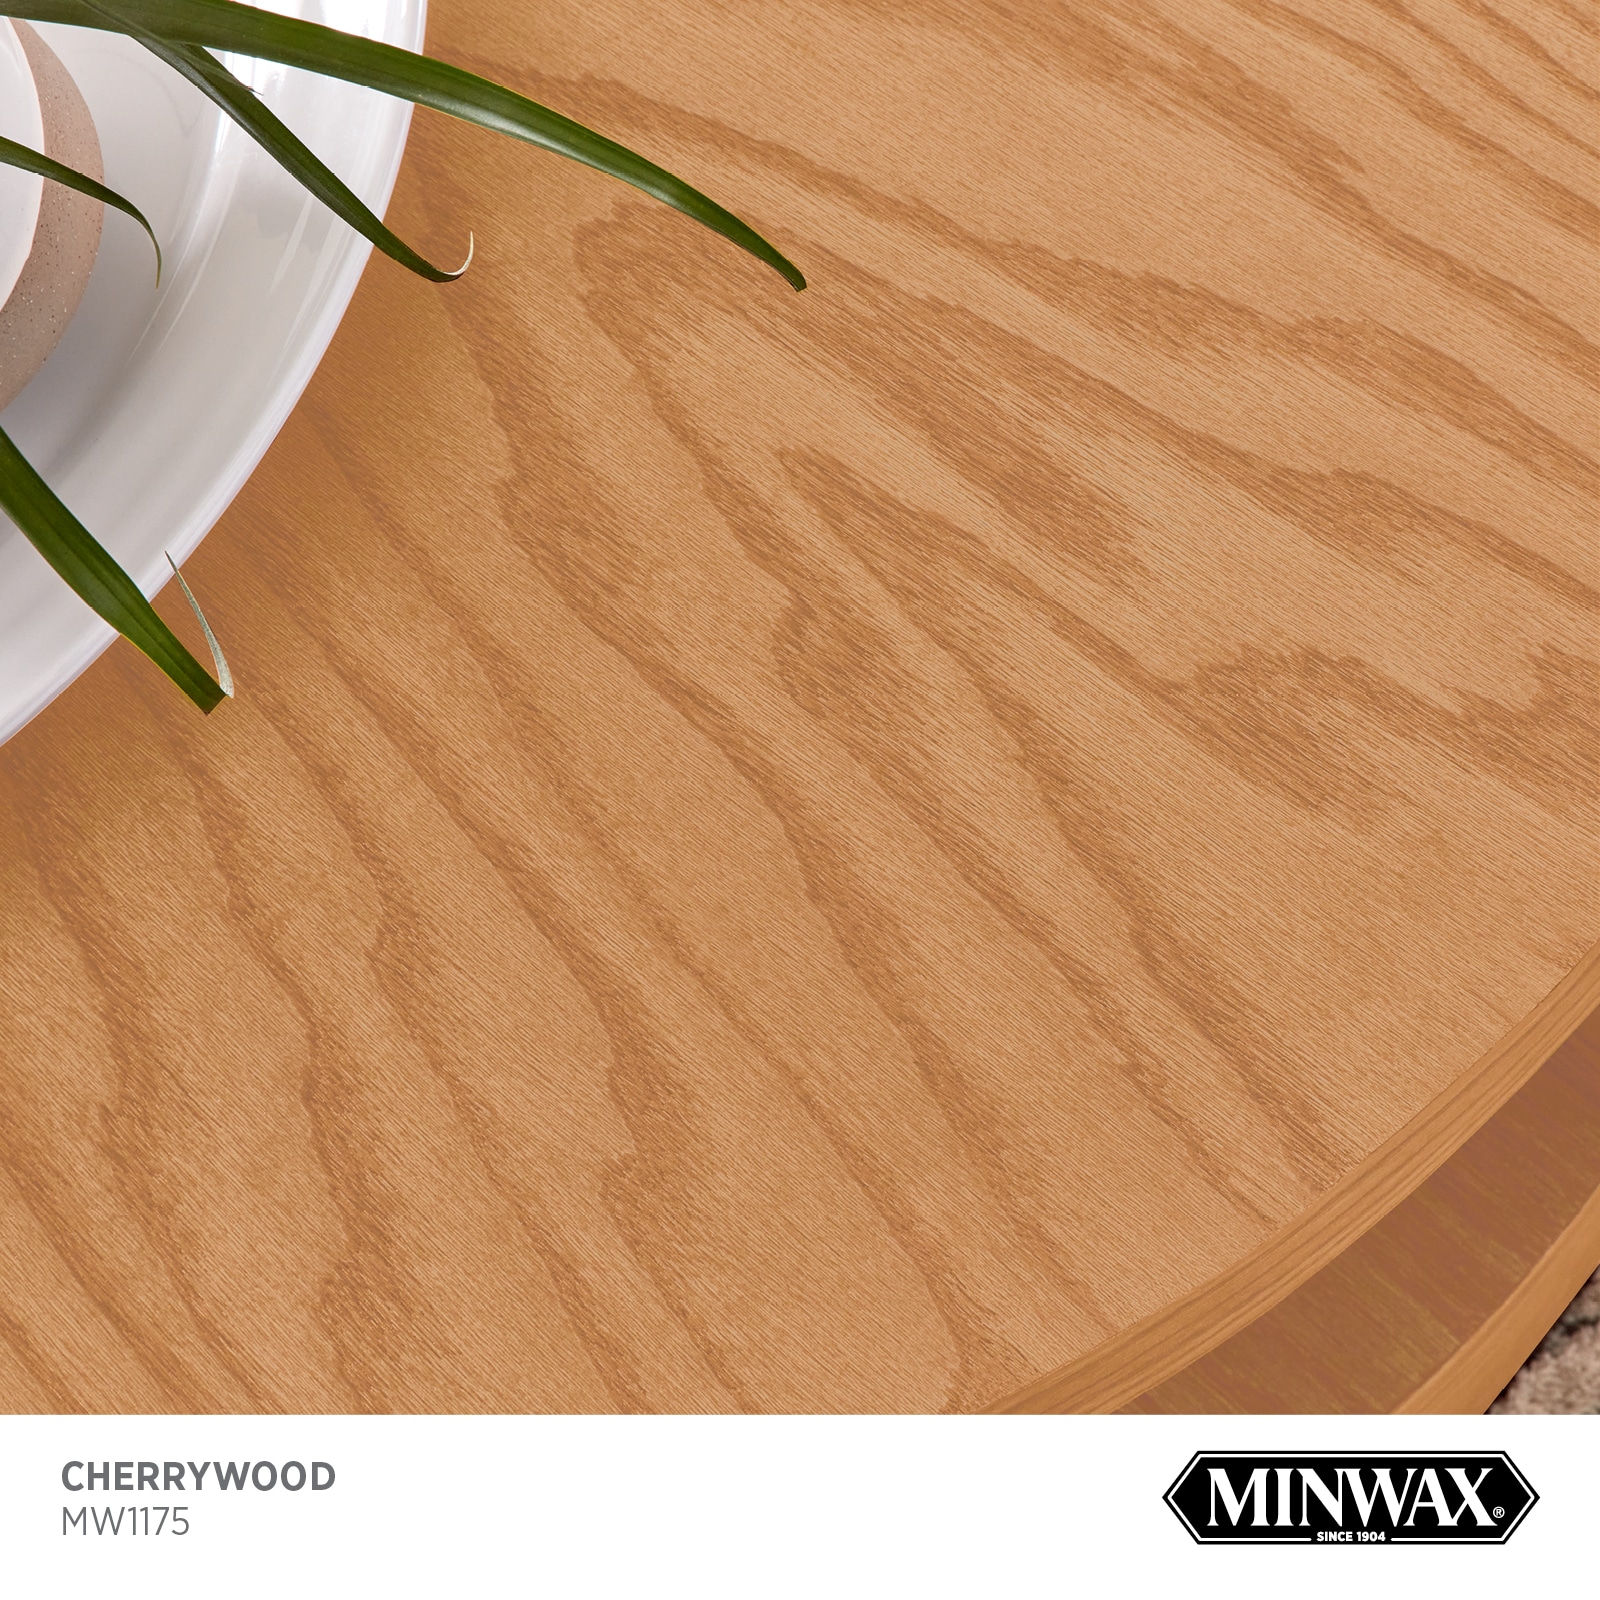 Minwax Wood Finish Water-Based Cherry Blossom Mw1169 Solid Interior Stain  (1-Quart) in the Interior Stains department at